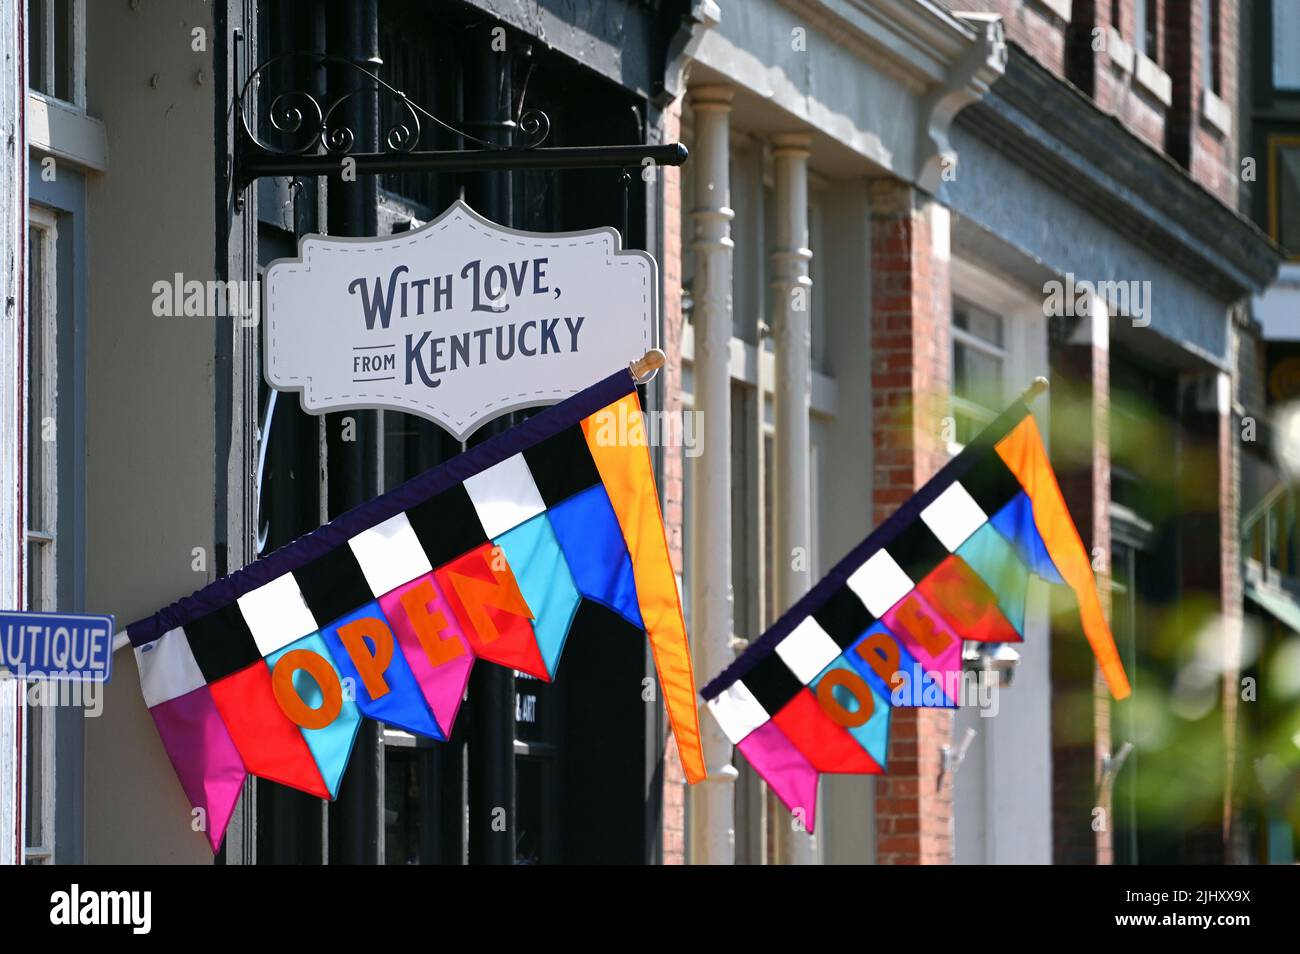 Business street in the historic center of Paducah, Kentucky, United States of America Stock Photo